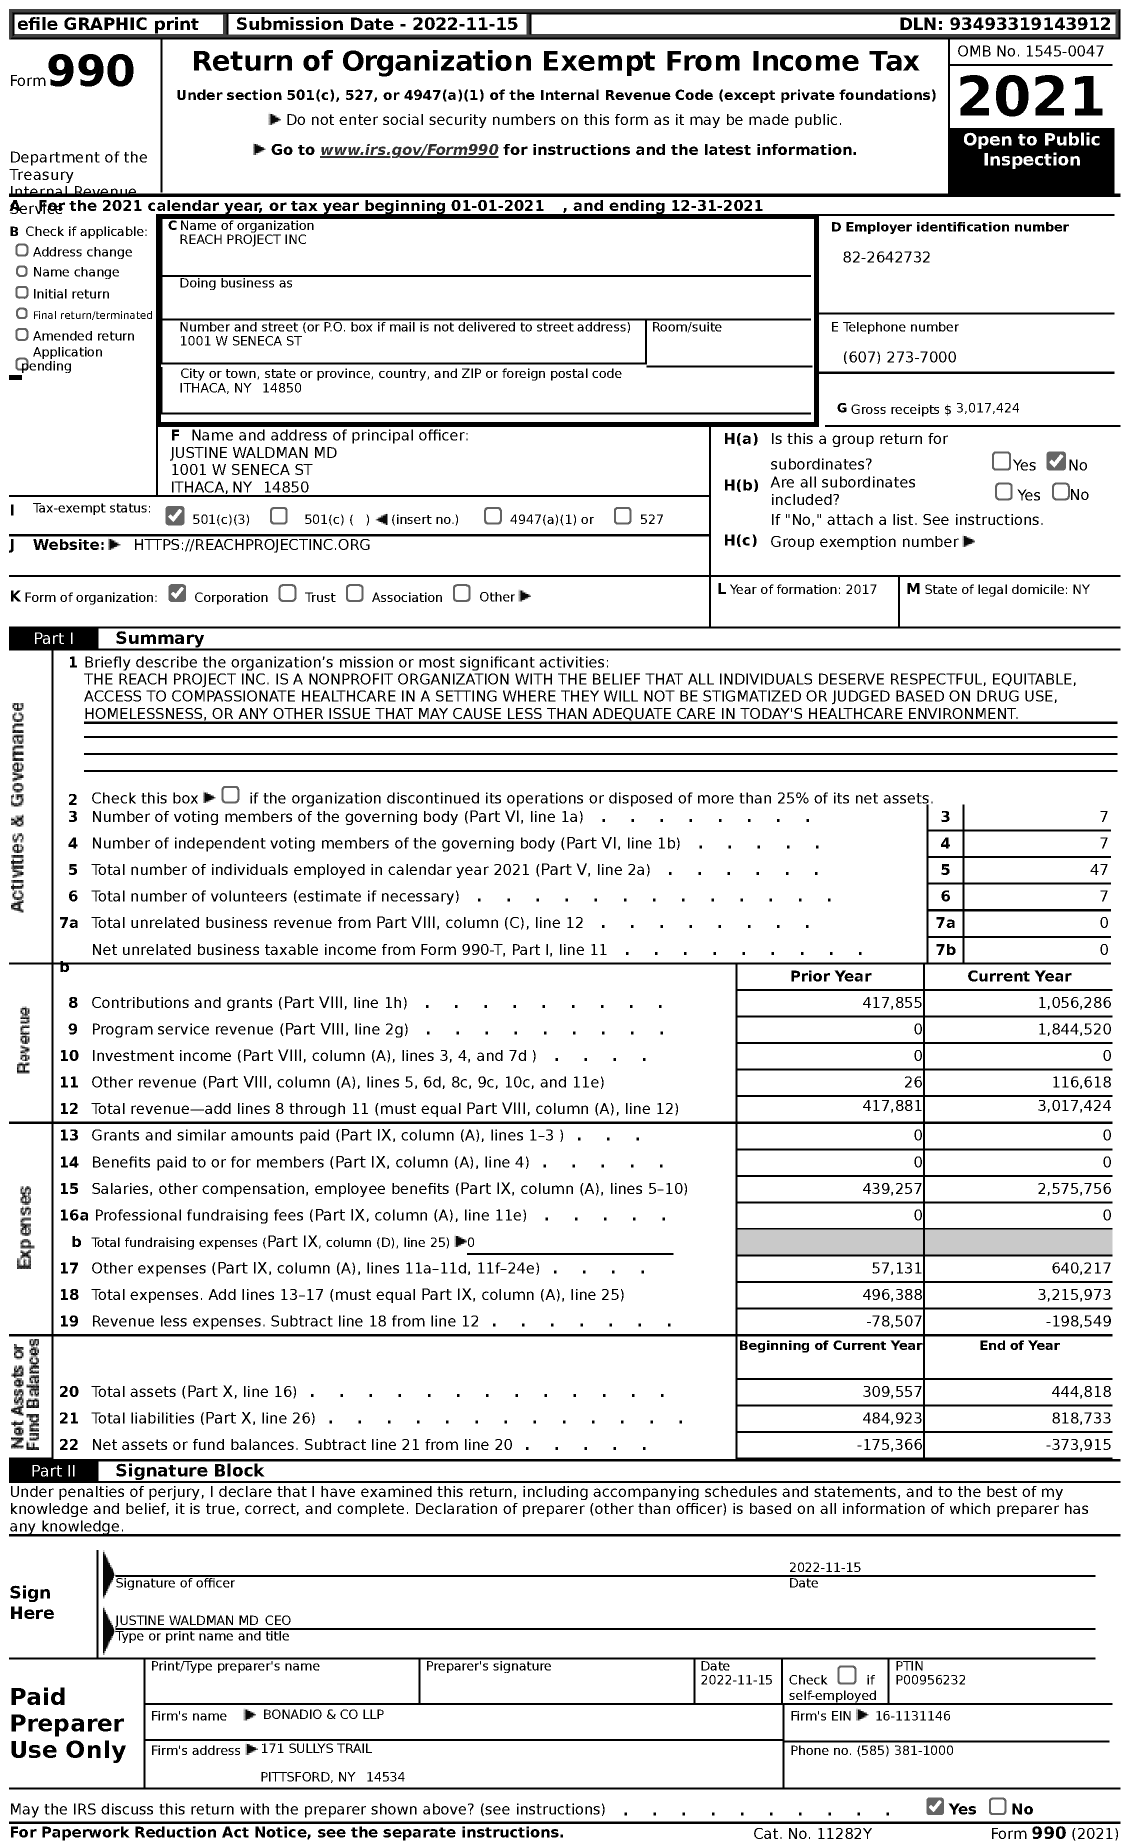 Image of first page of 2021 Form 990 for Reach Project